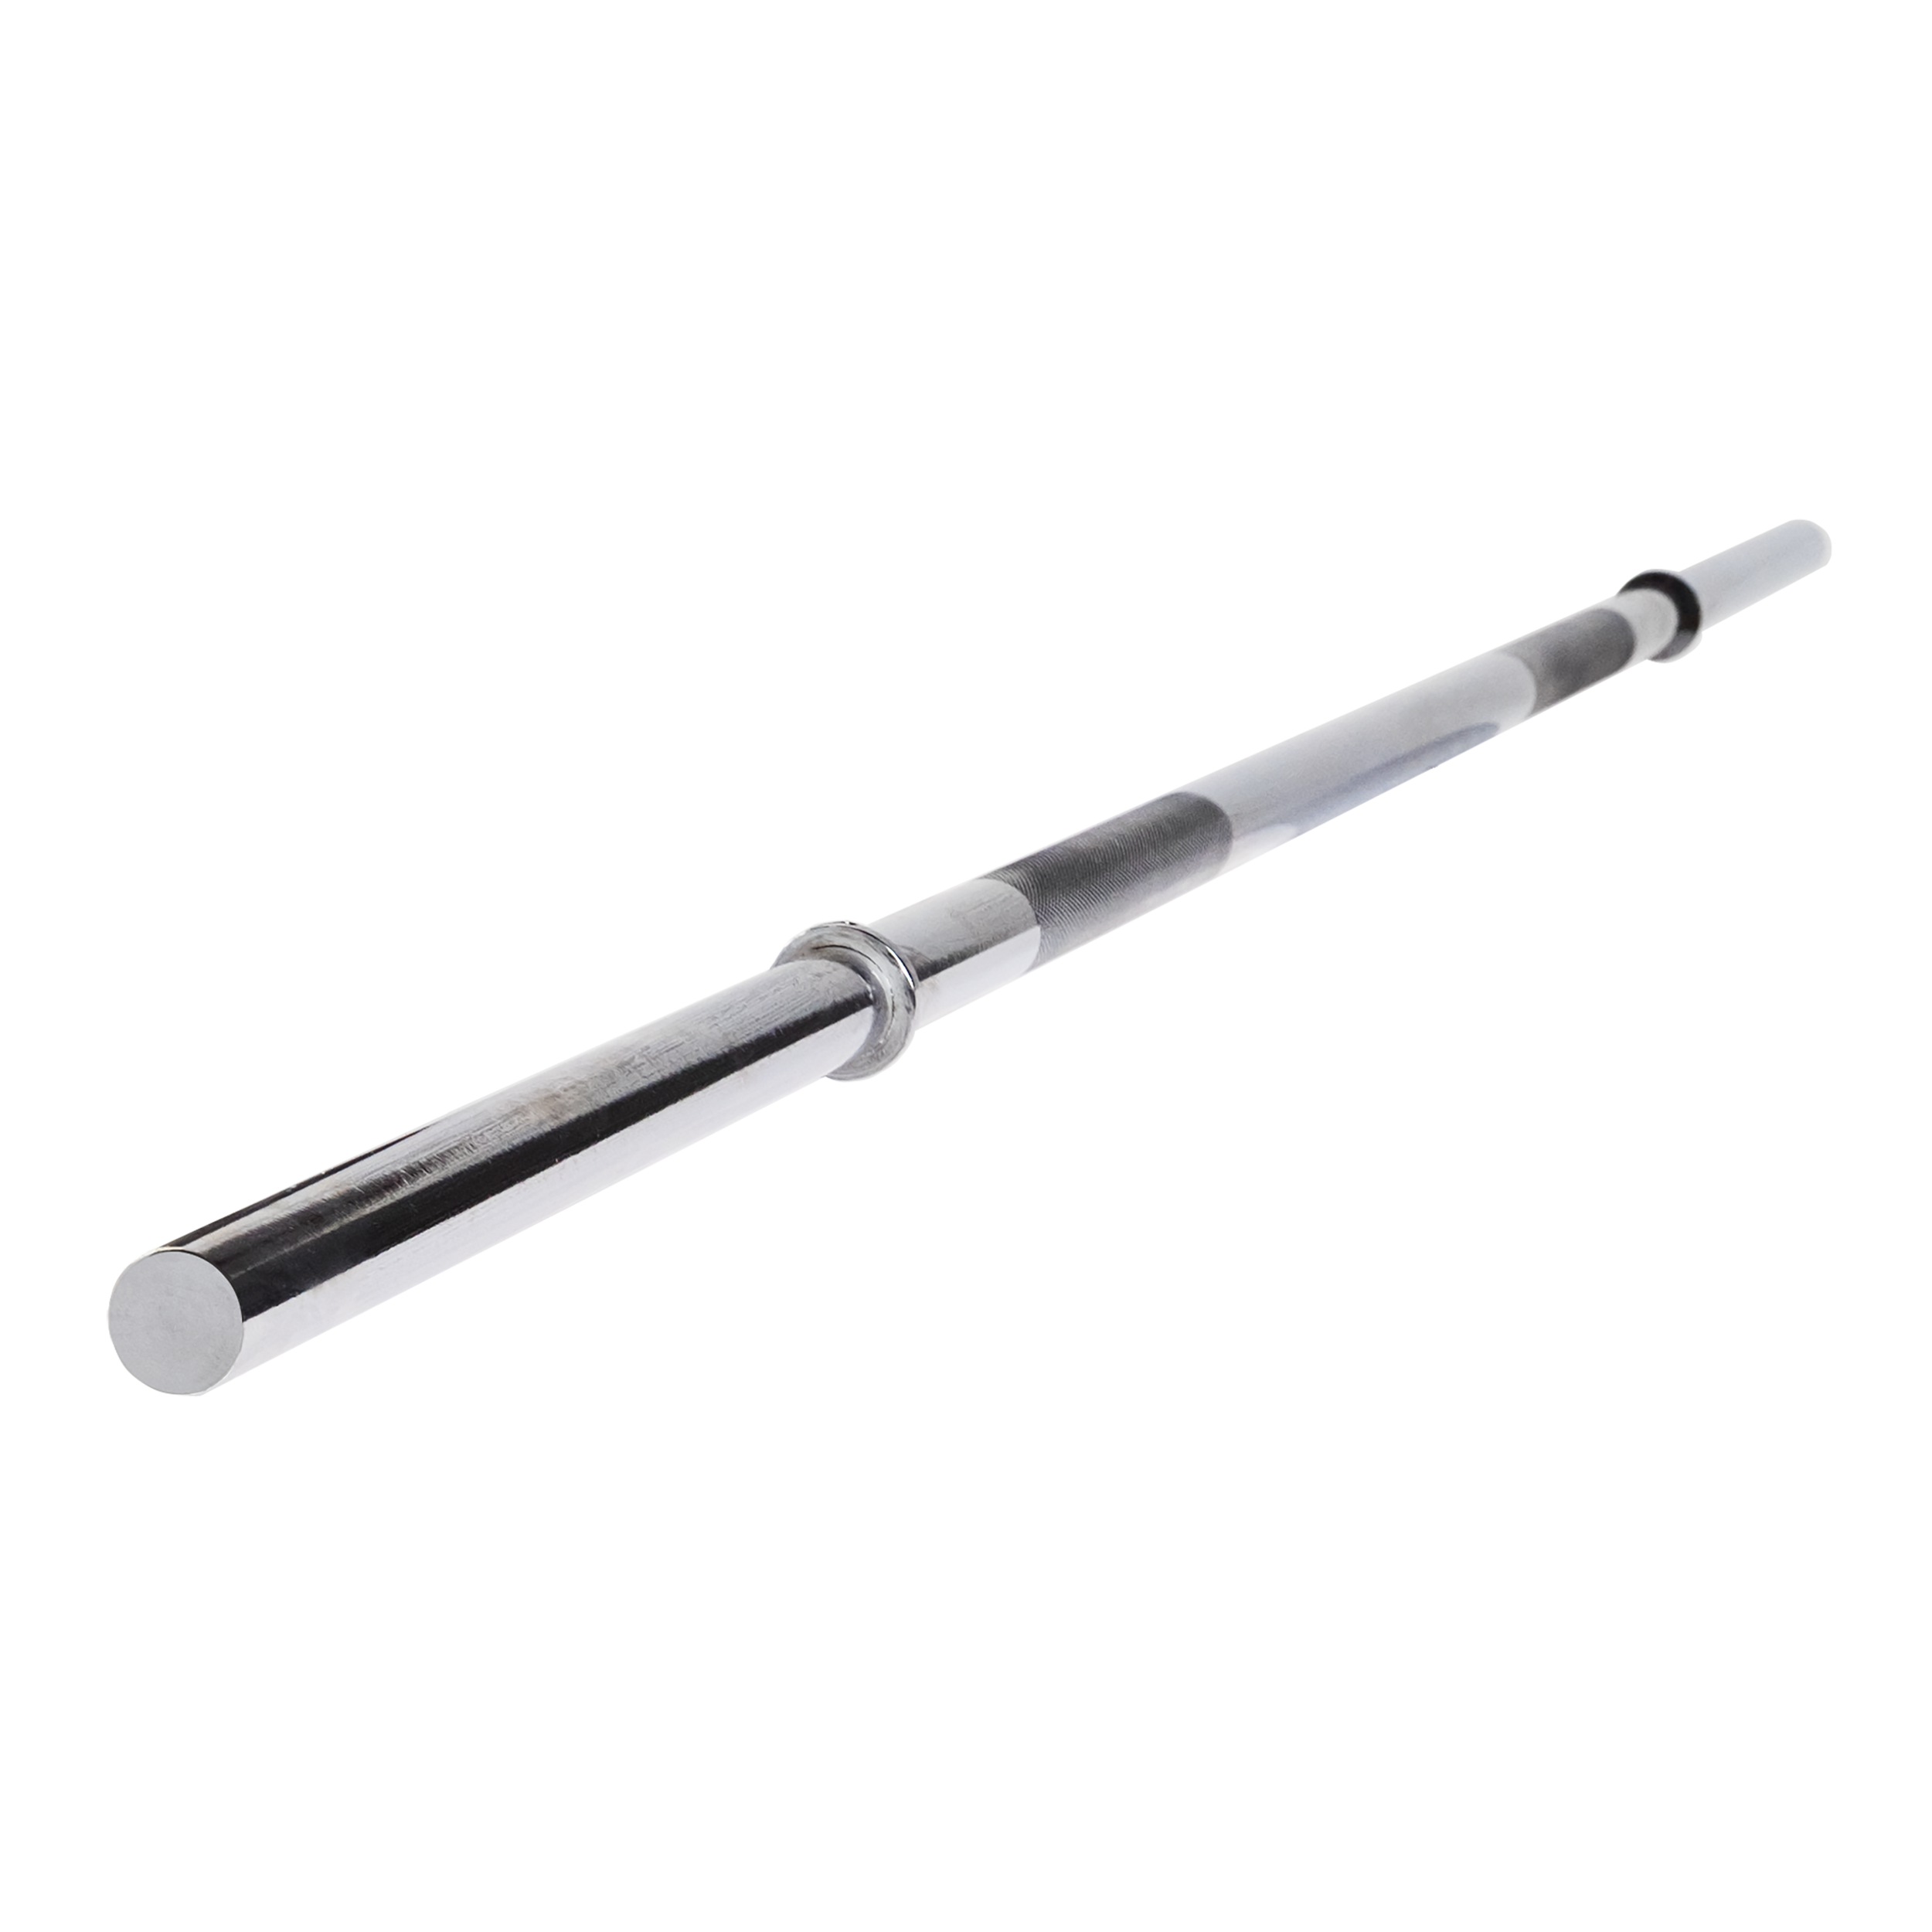 Body Solid RB72 6' Standard Free-Weight Chrome Bar - image 1 of 3